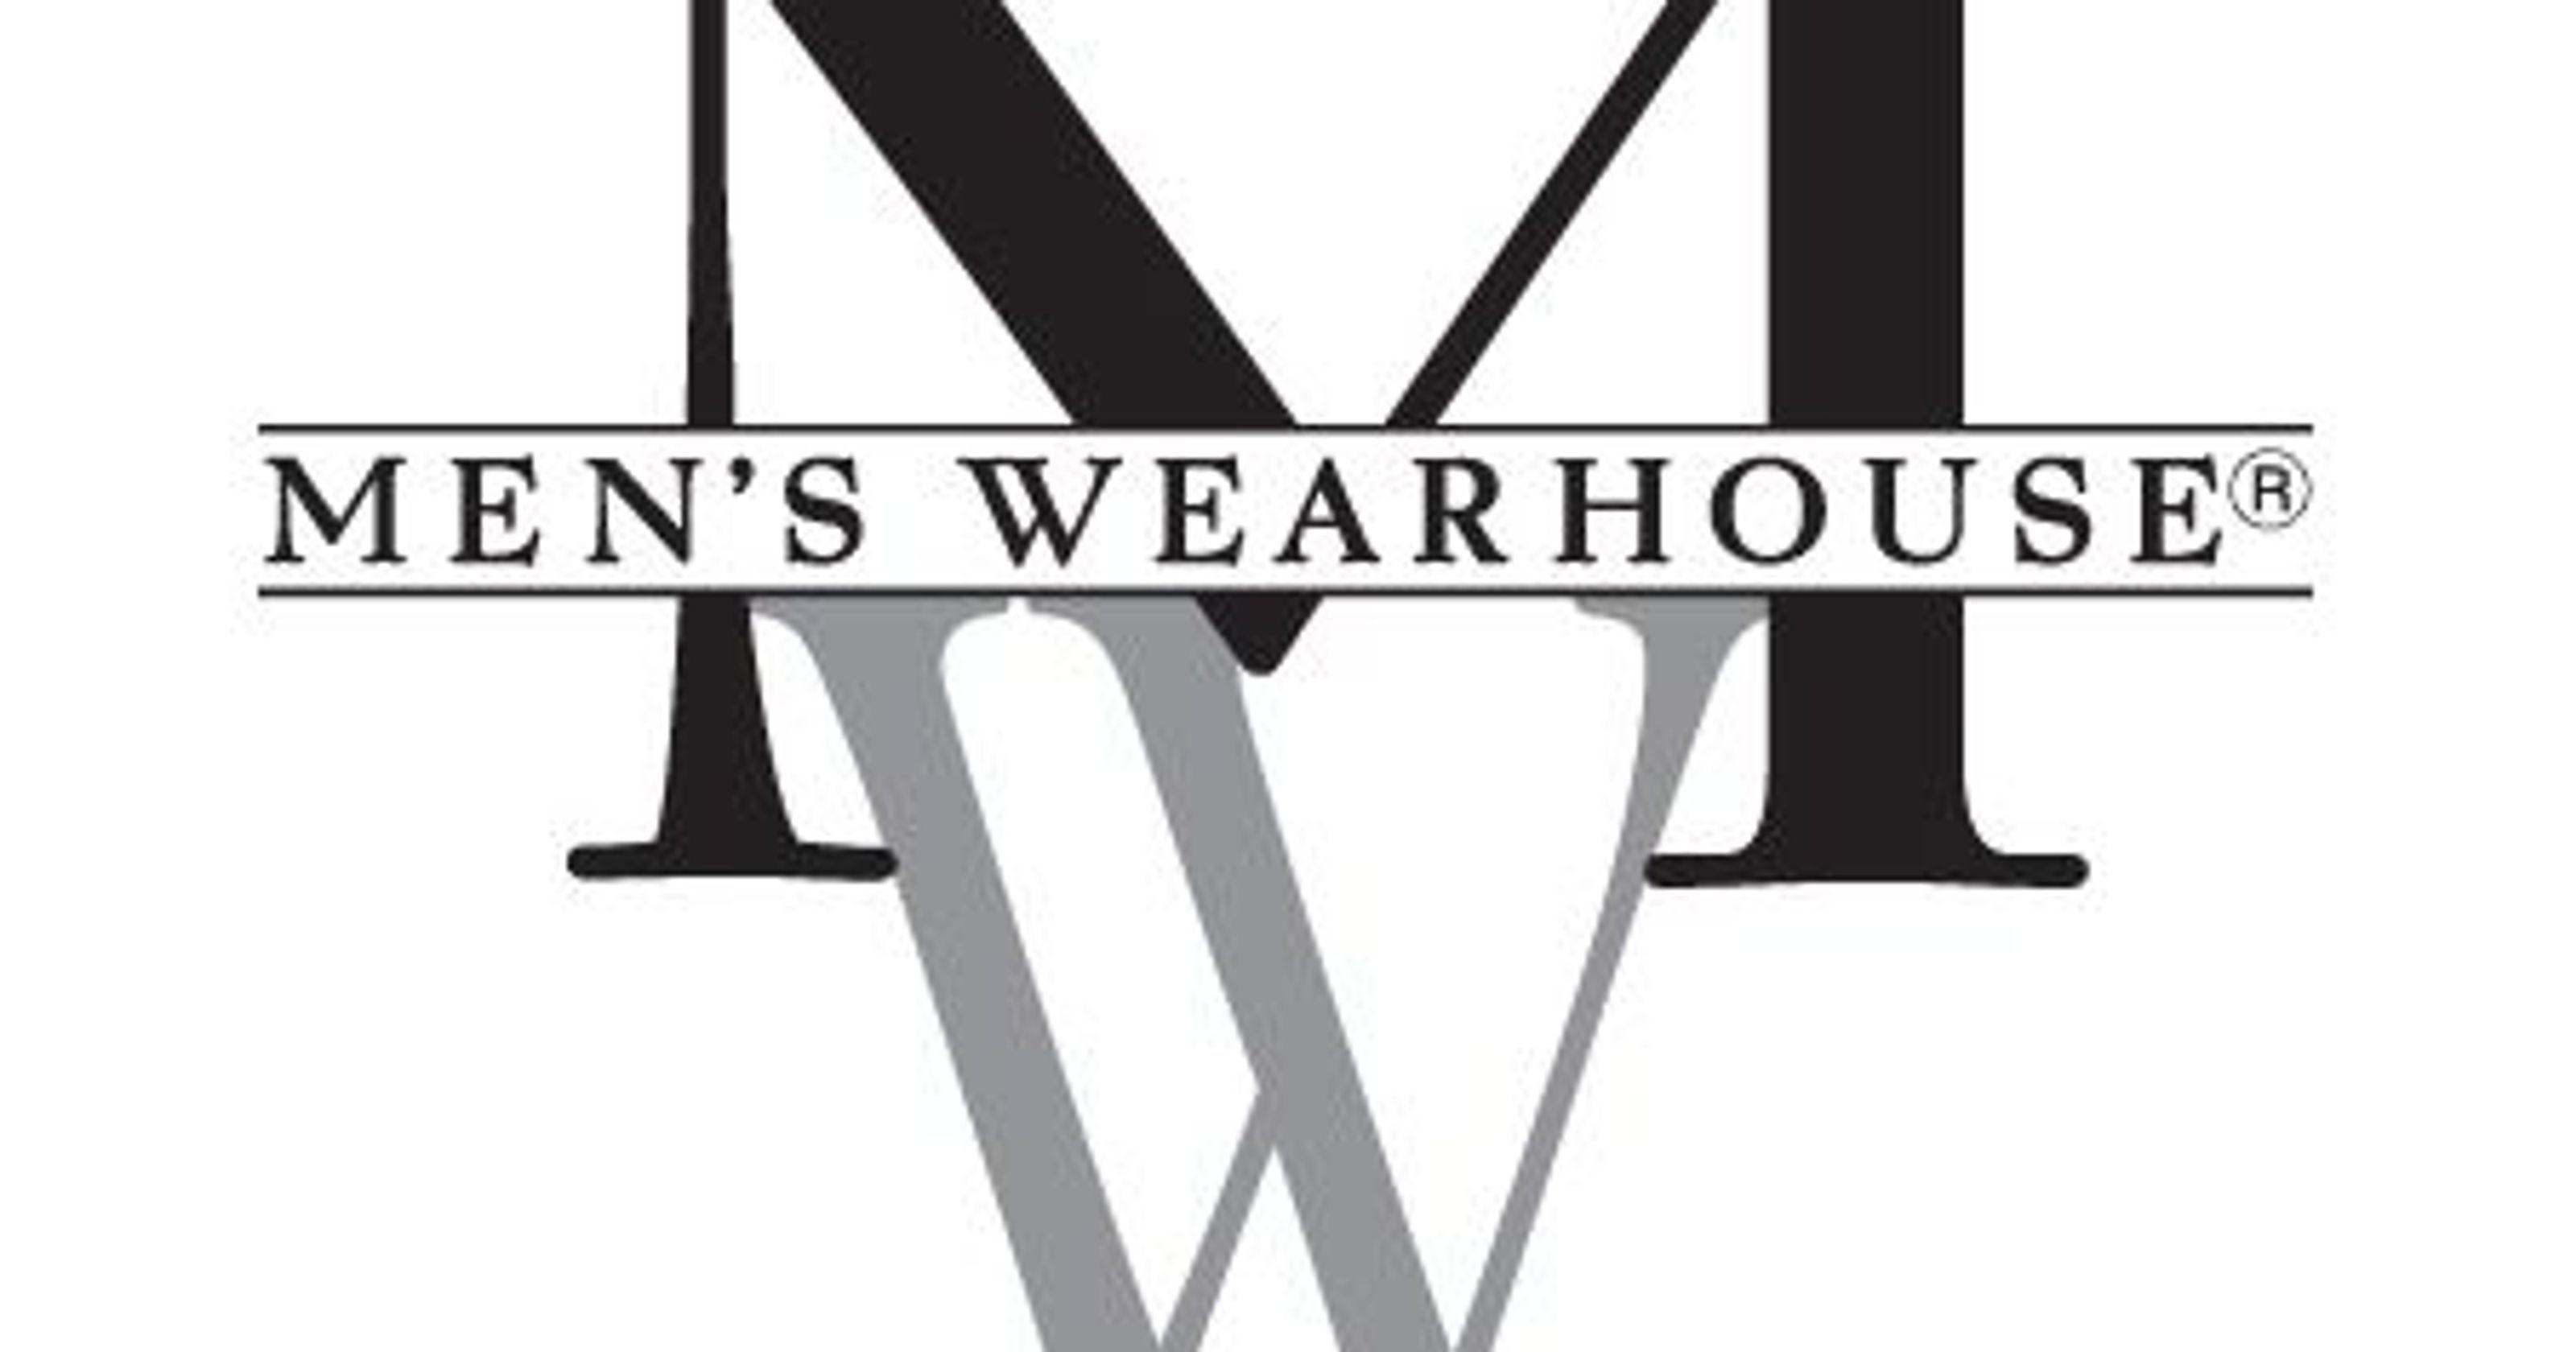 Men's Wearhouse Logo - Jos. A. Bank continues to be a drag on Men's Wearhouse sales, shares ...